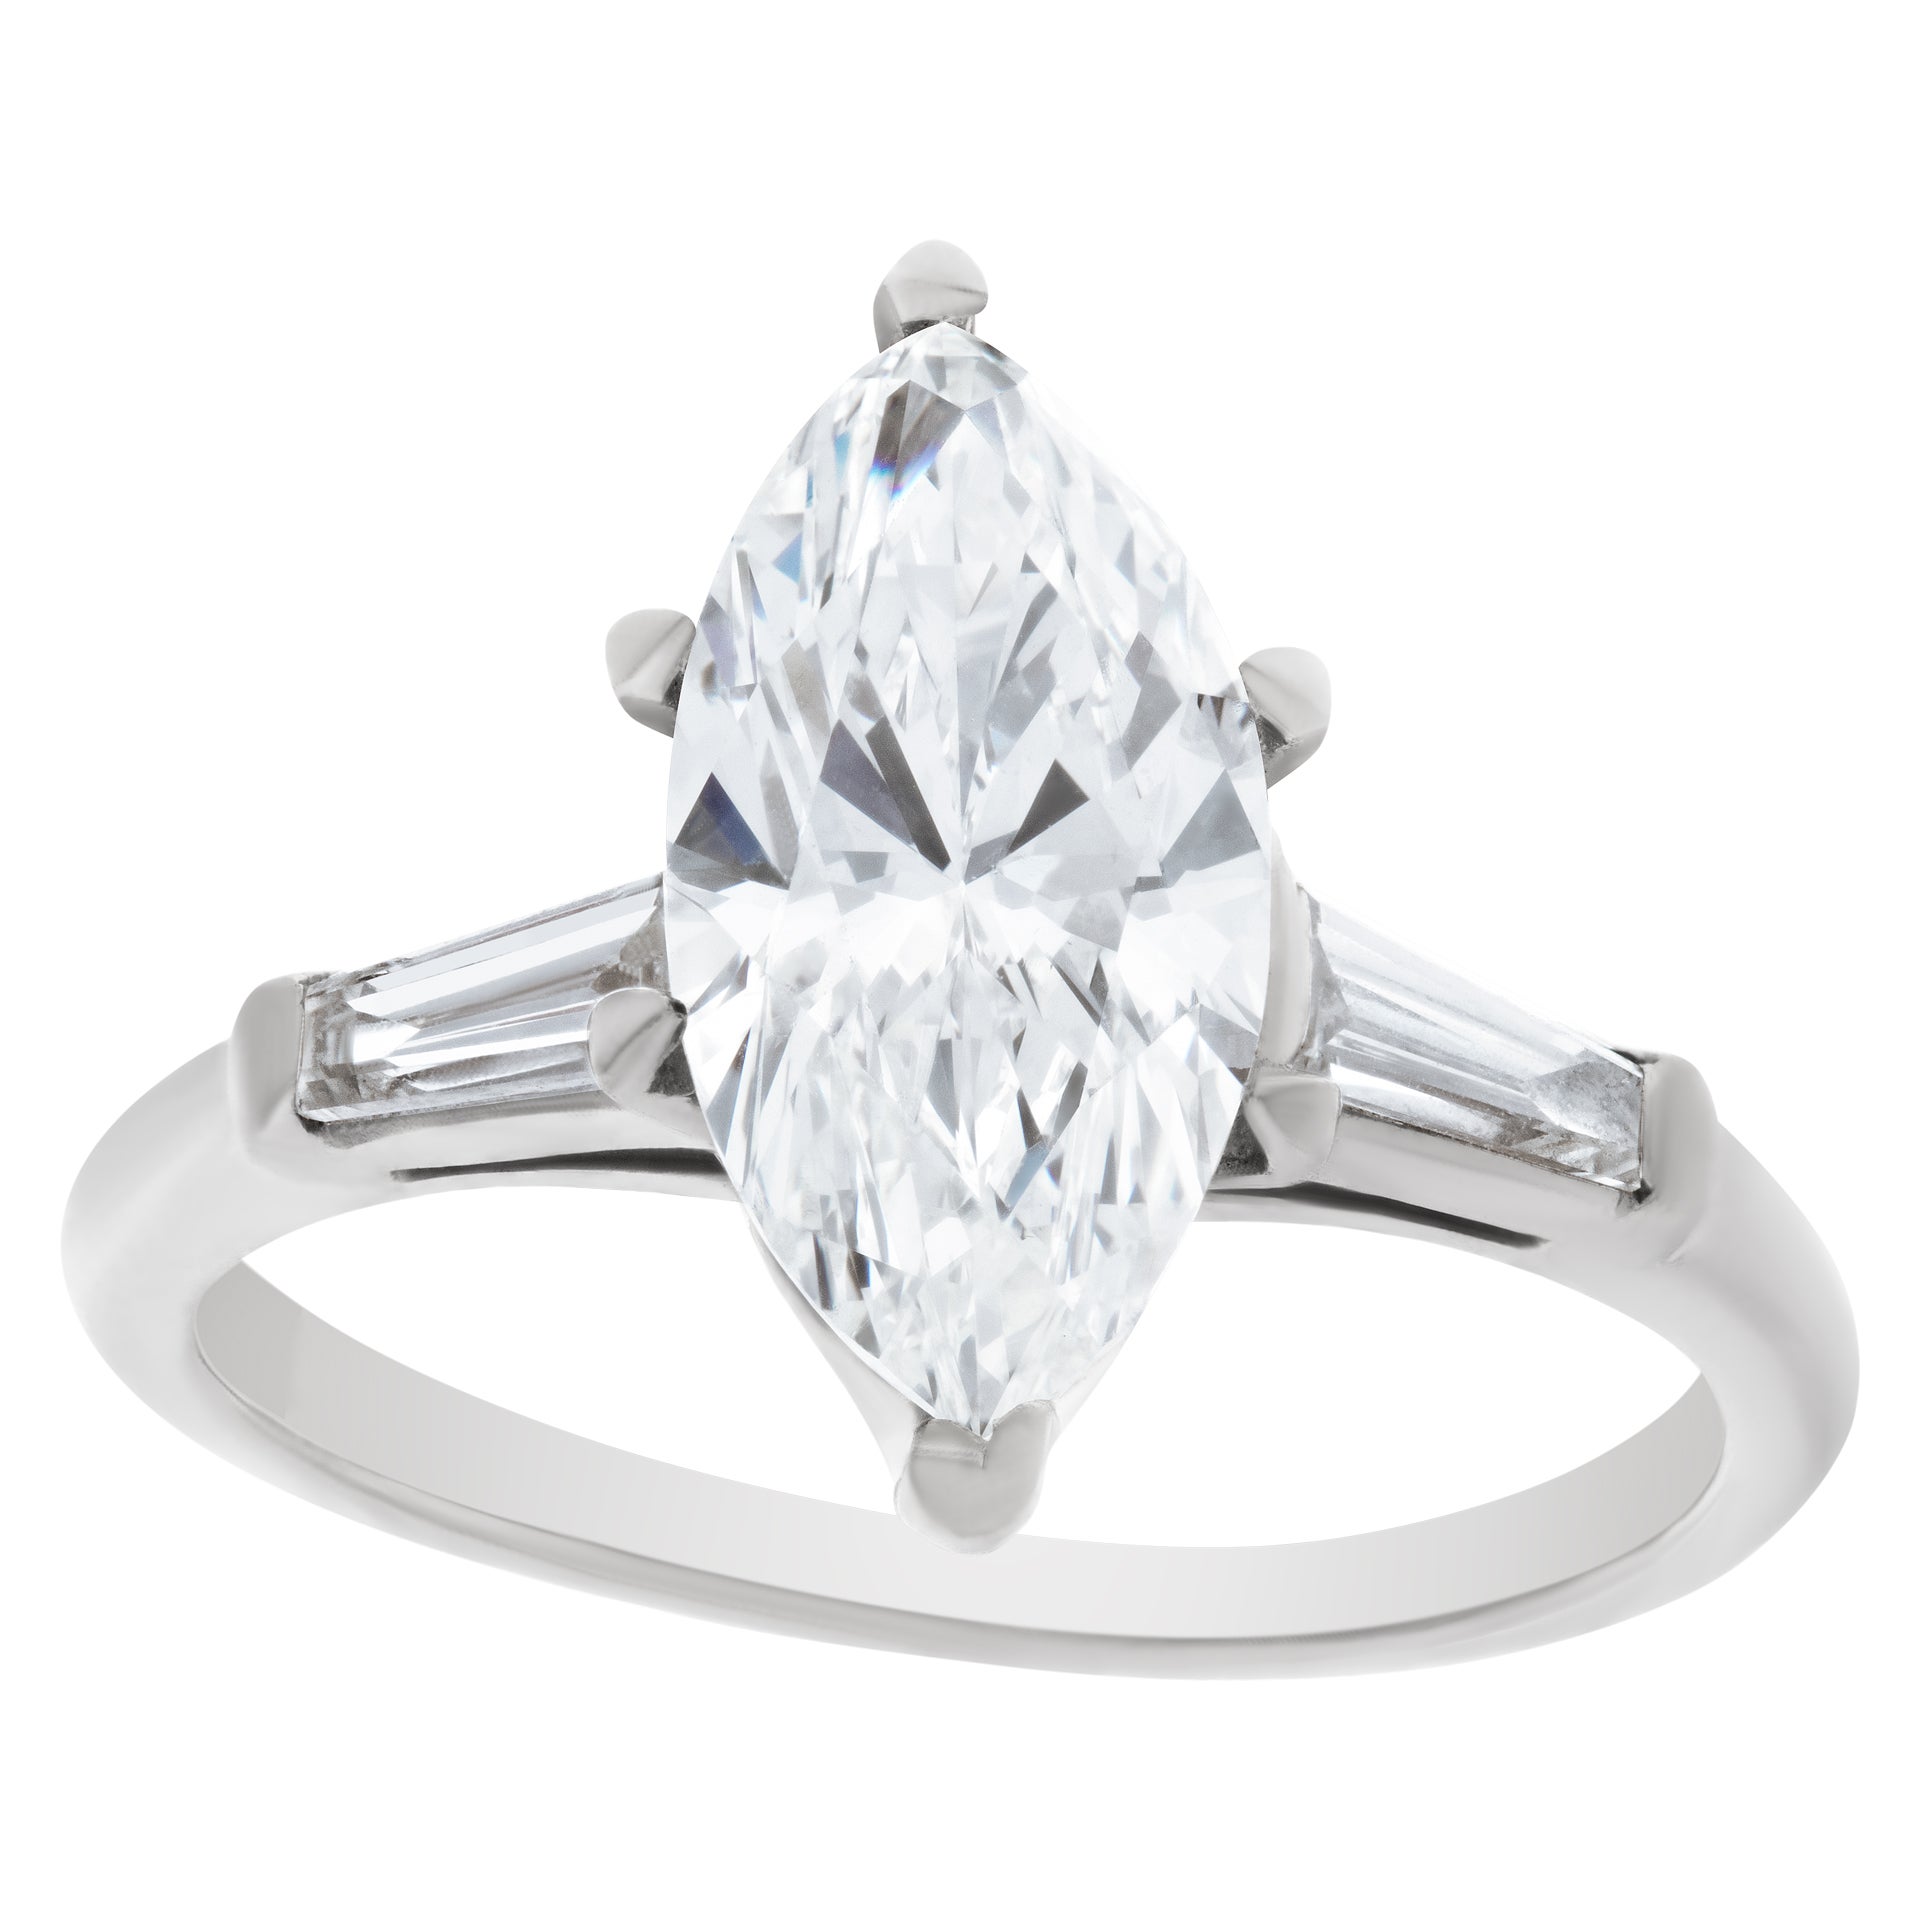 GIA Certified Marquise Brilliant Cut Diamond Ring 1.75 Carat For Sale